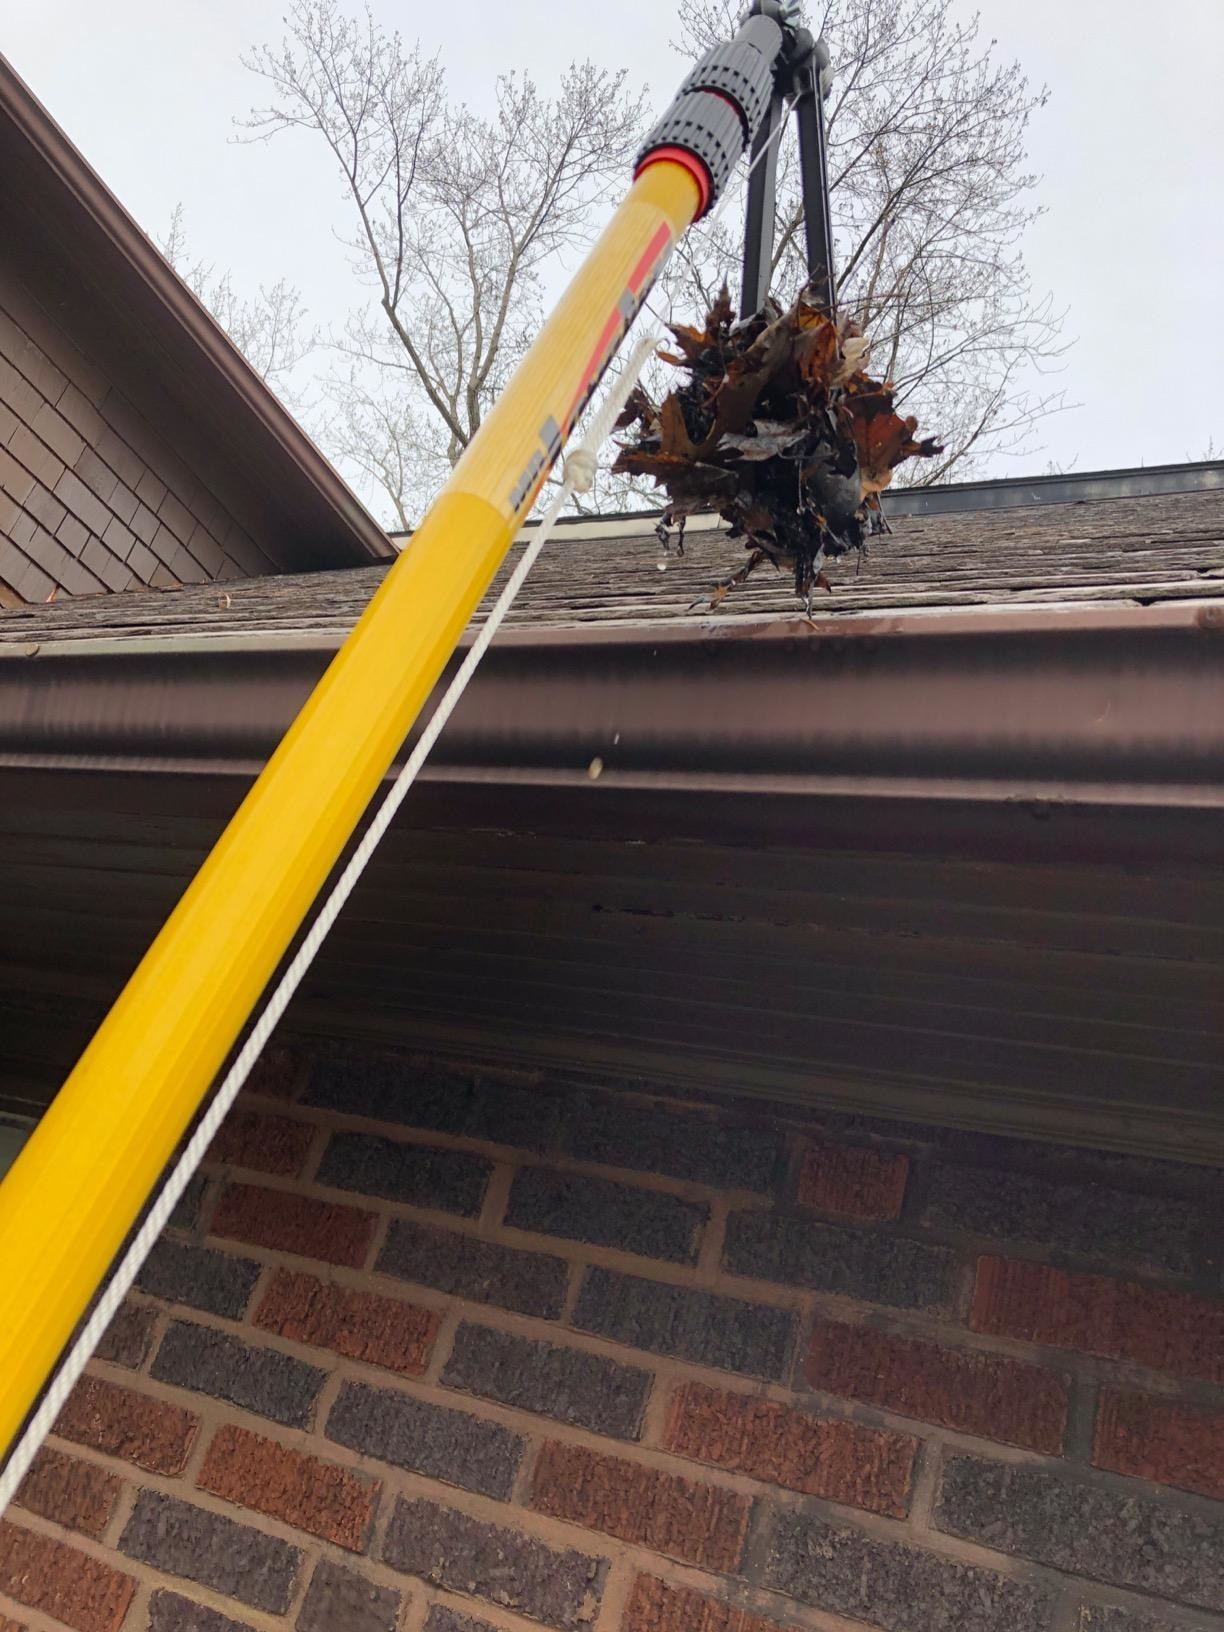 7 Best Gutter Cleaning Tools And, How Can I Clean My Gutters From The Ground